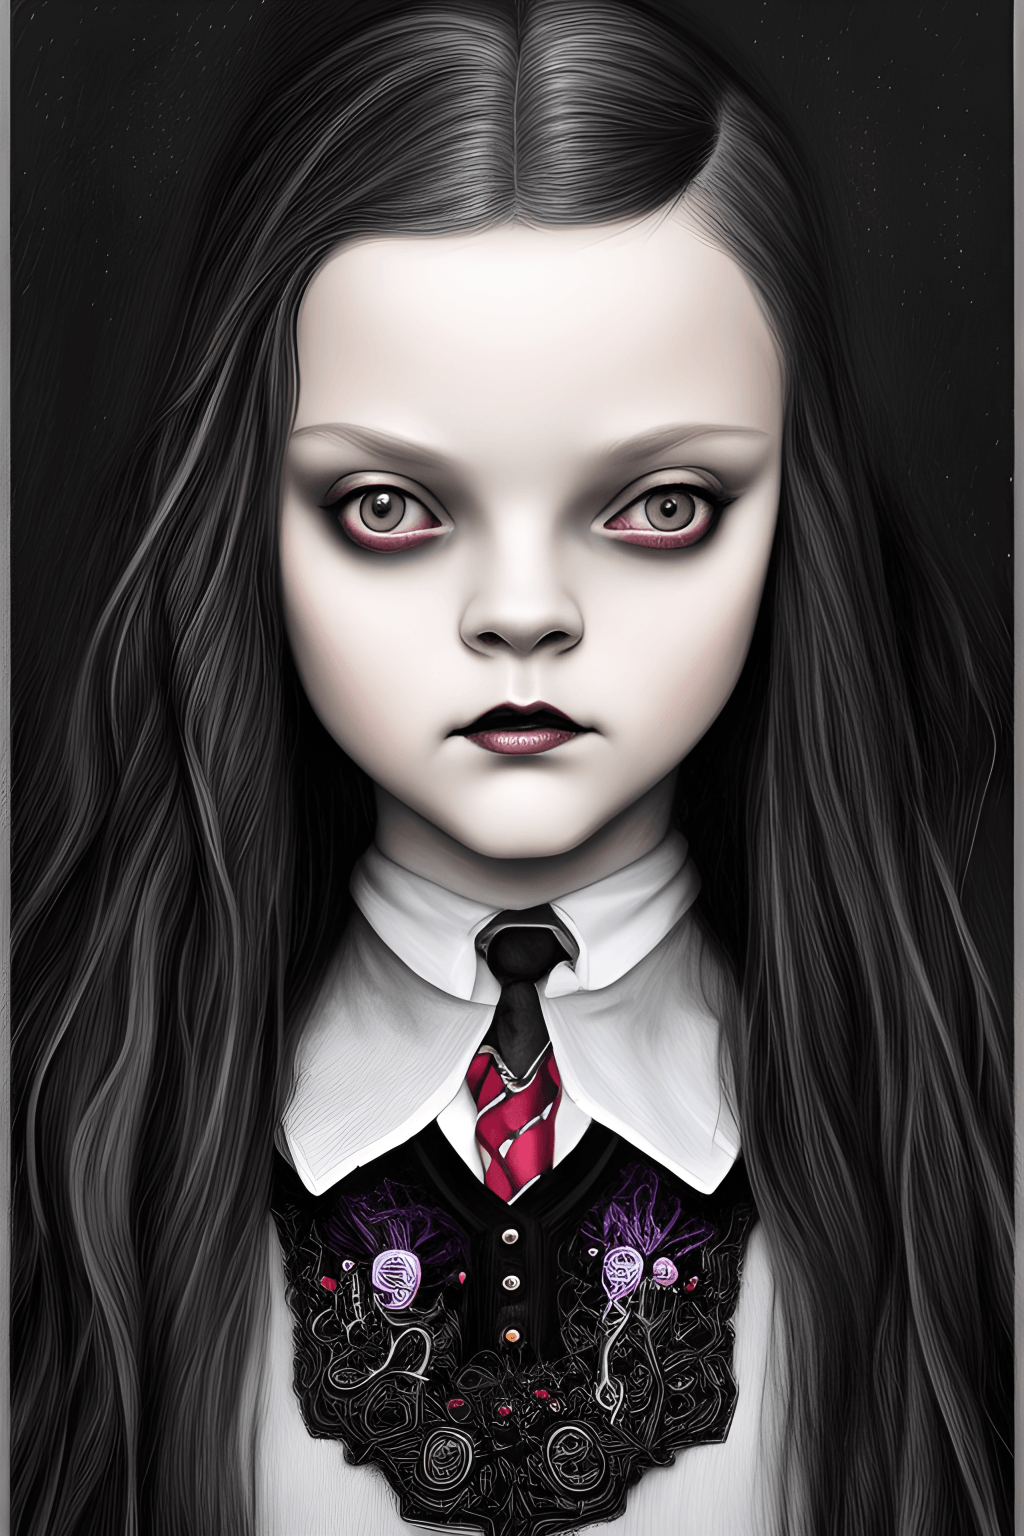 Beautiful Wednesday Addams Wearing School Uniform by Charlie Bowater by ...